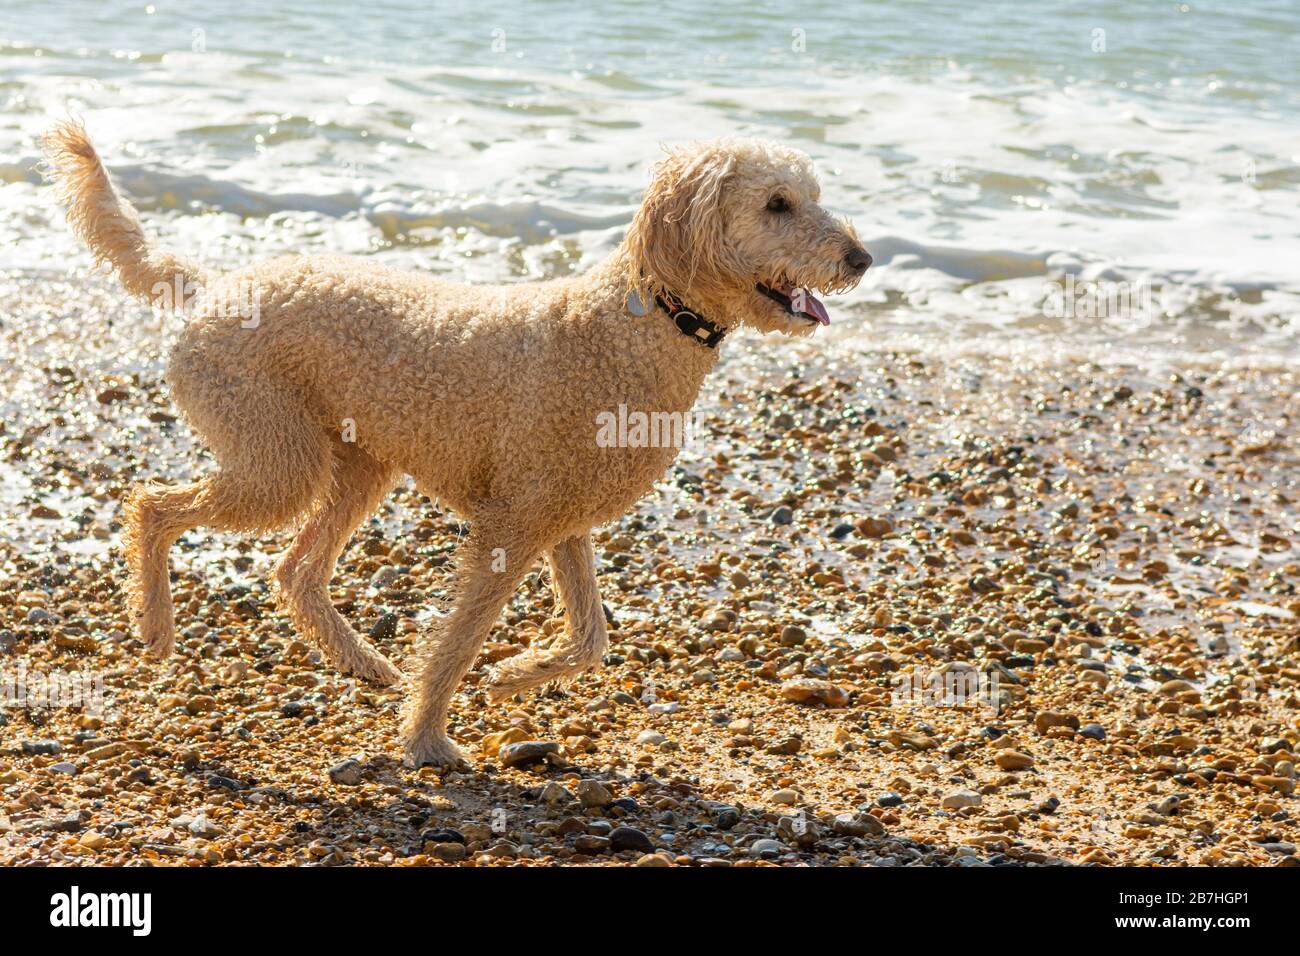 A white poodle cross dog running through sea water in sparkling spring sunshine Stock Photo